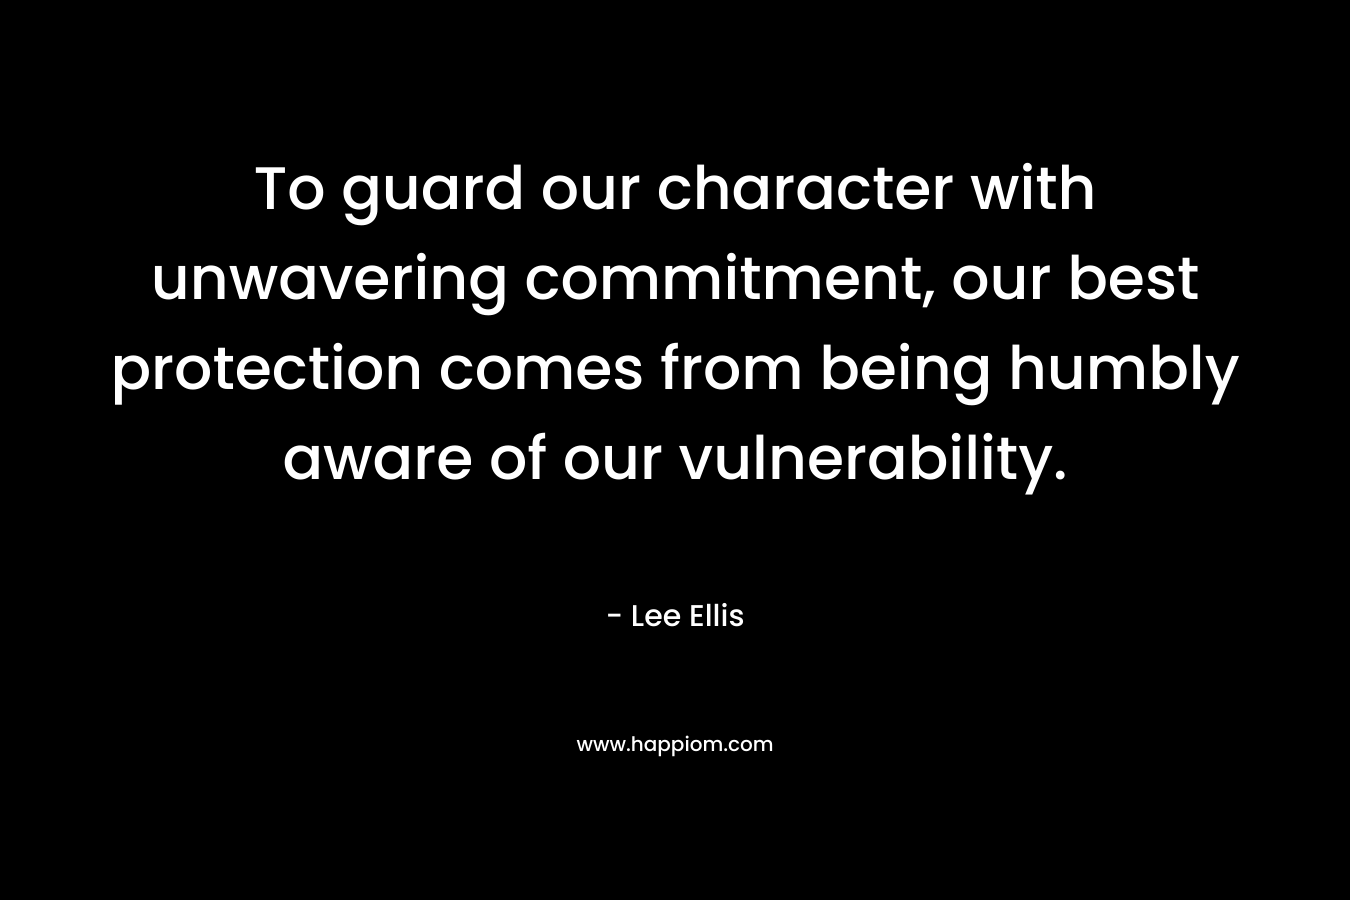 To guard our character with unwavering commitment, our best protection comes from being humbly aware of our vulnerability.